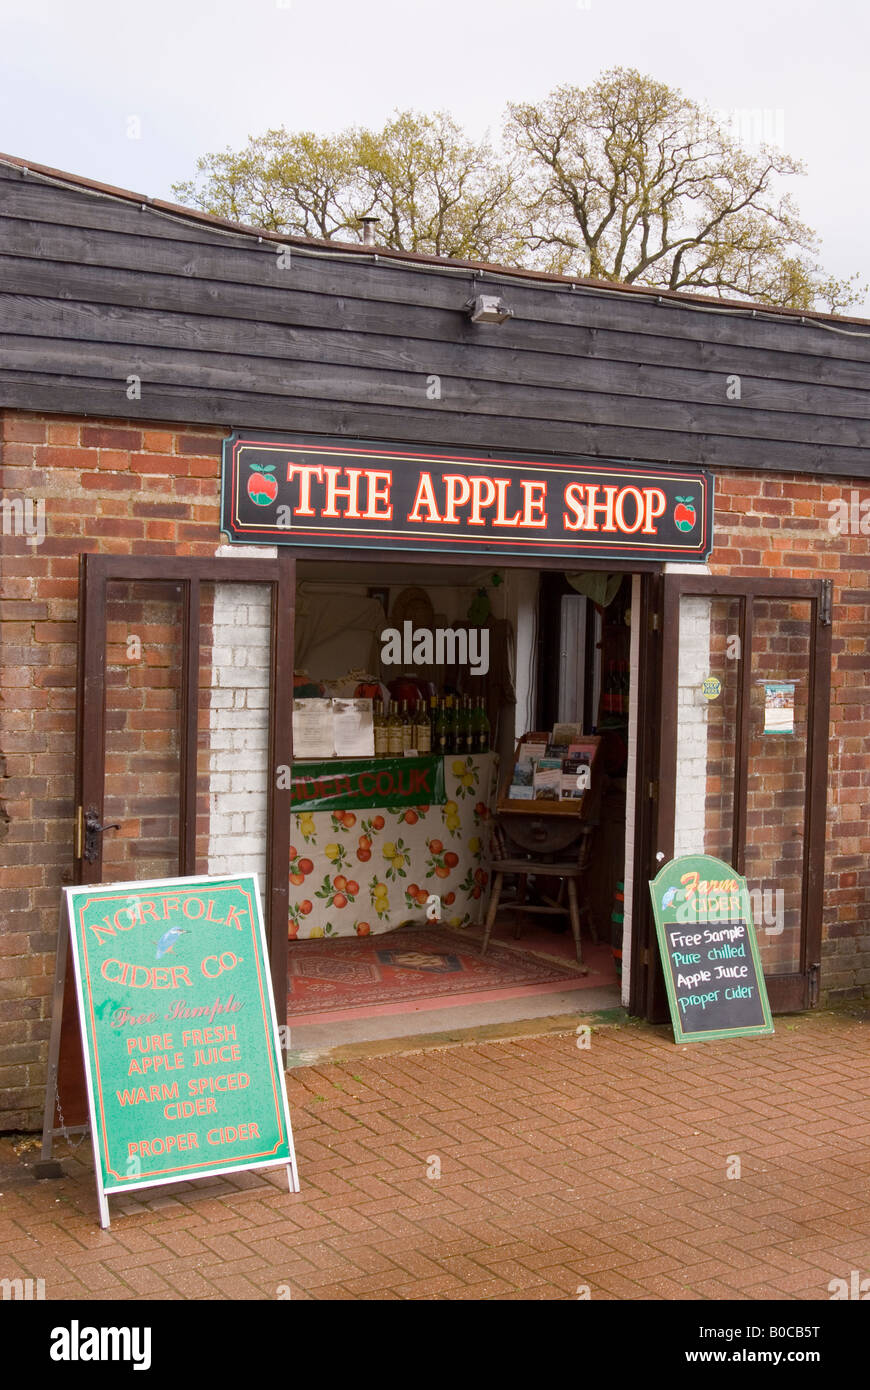 The Apple Shop At Wroxham Barns In Norfolk,Uk Stock Photo